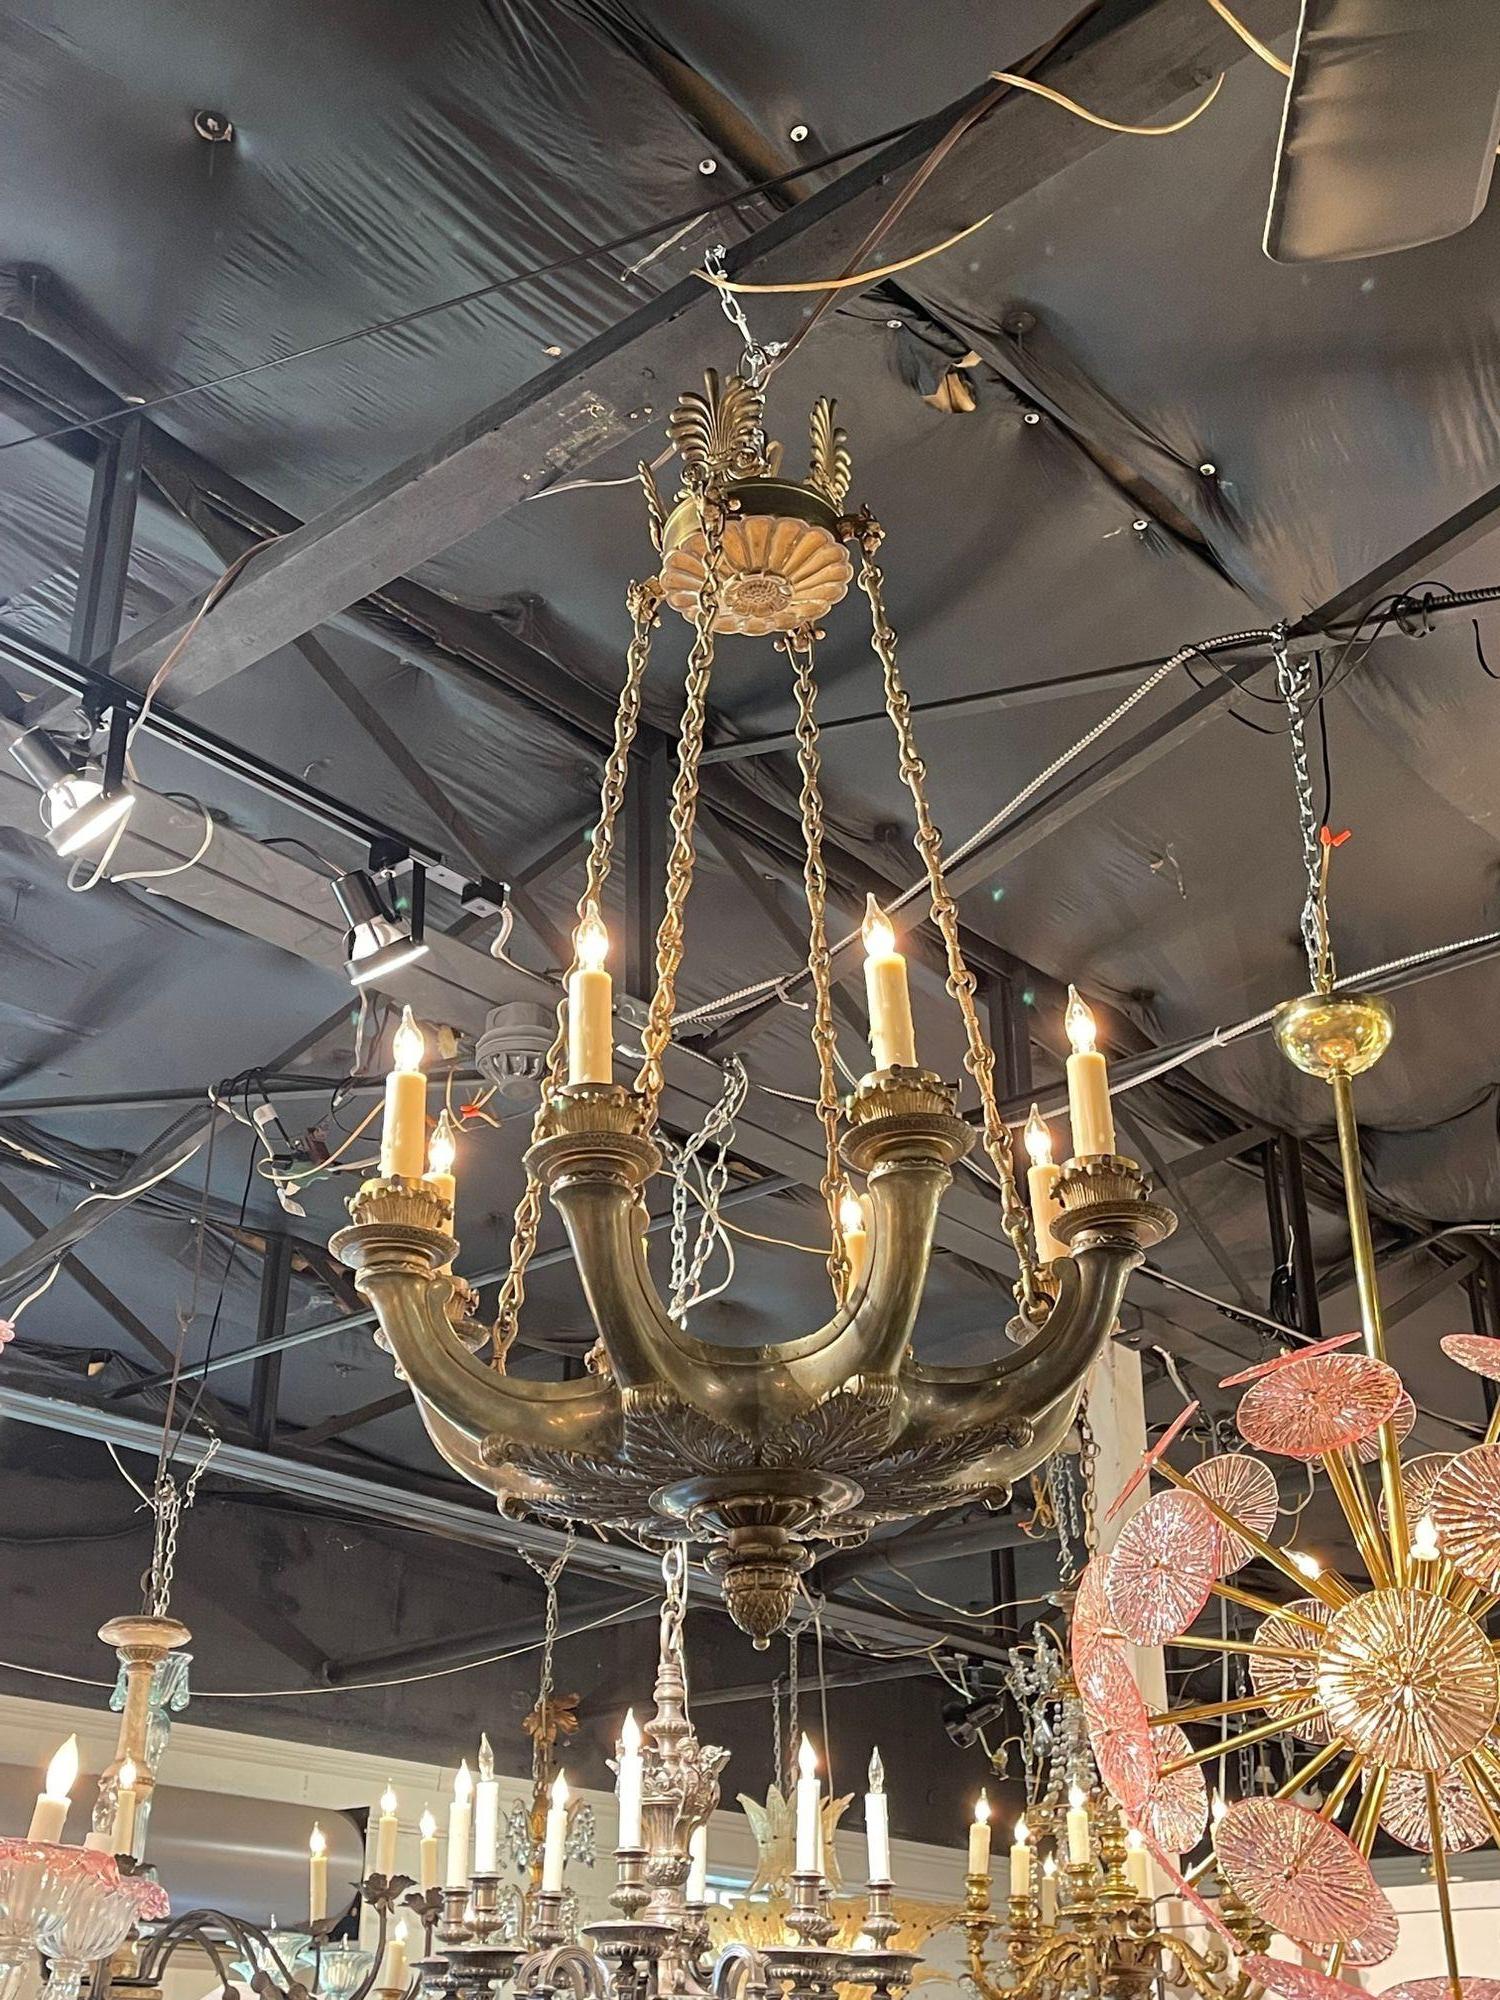 Handsome 19th century French Empire silver and bronze chandelier. Adds a real touch of elegance!